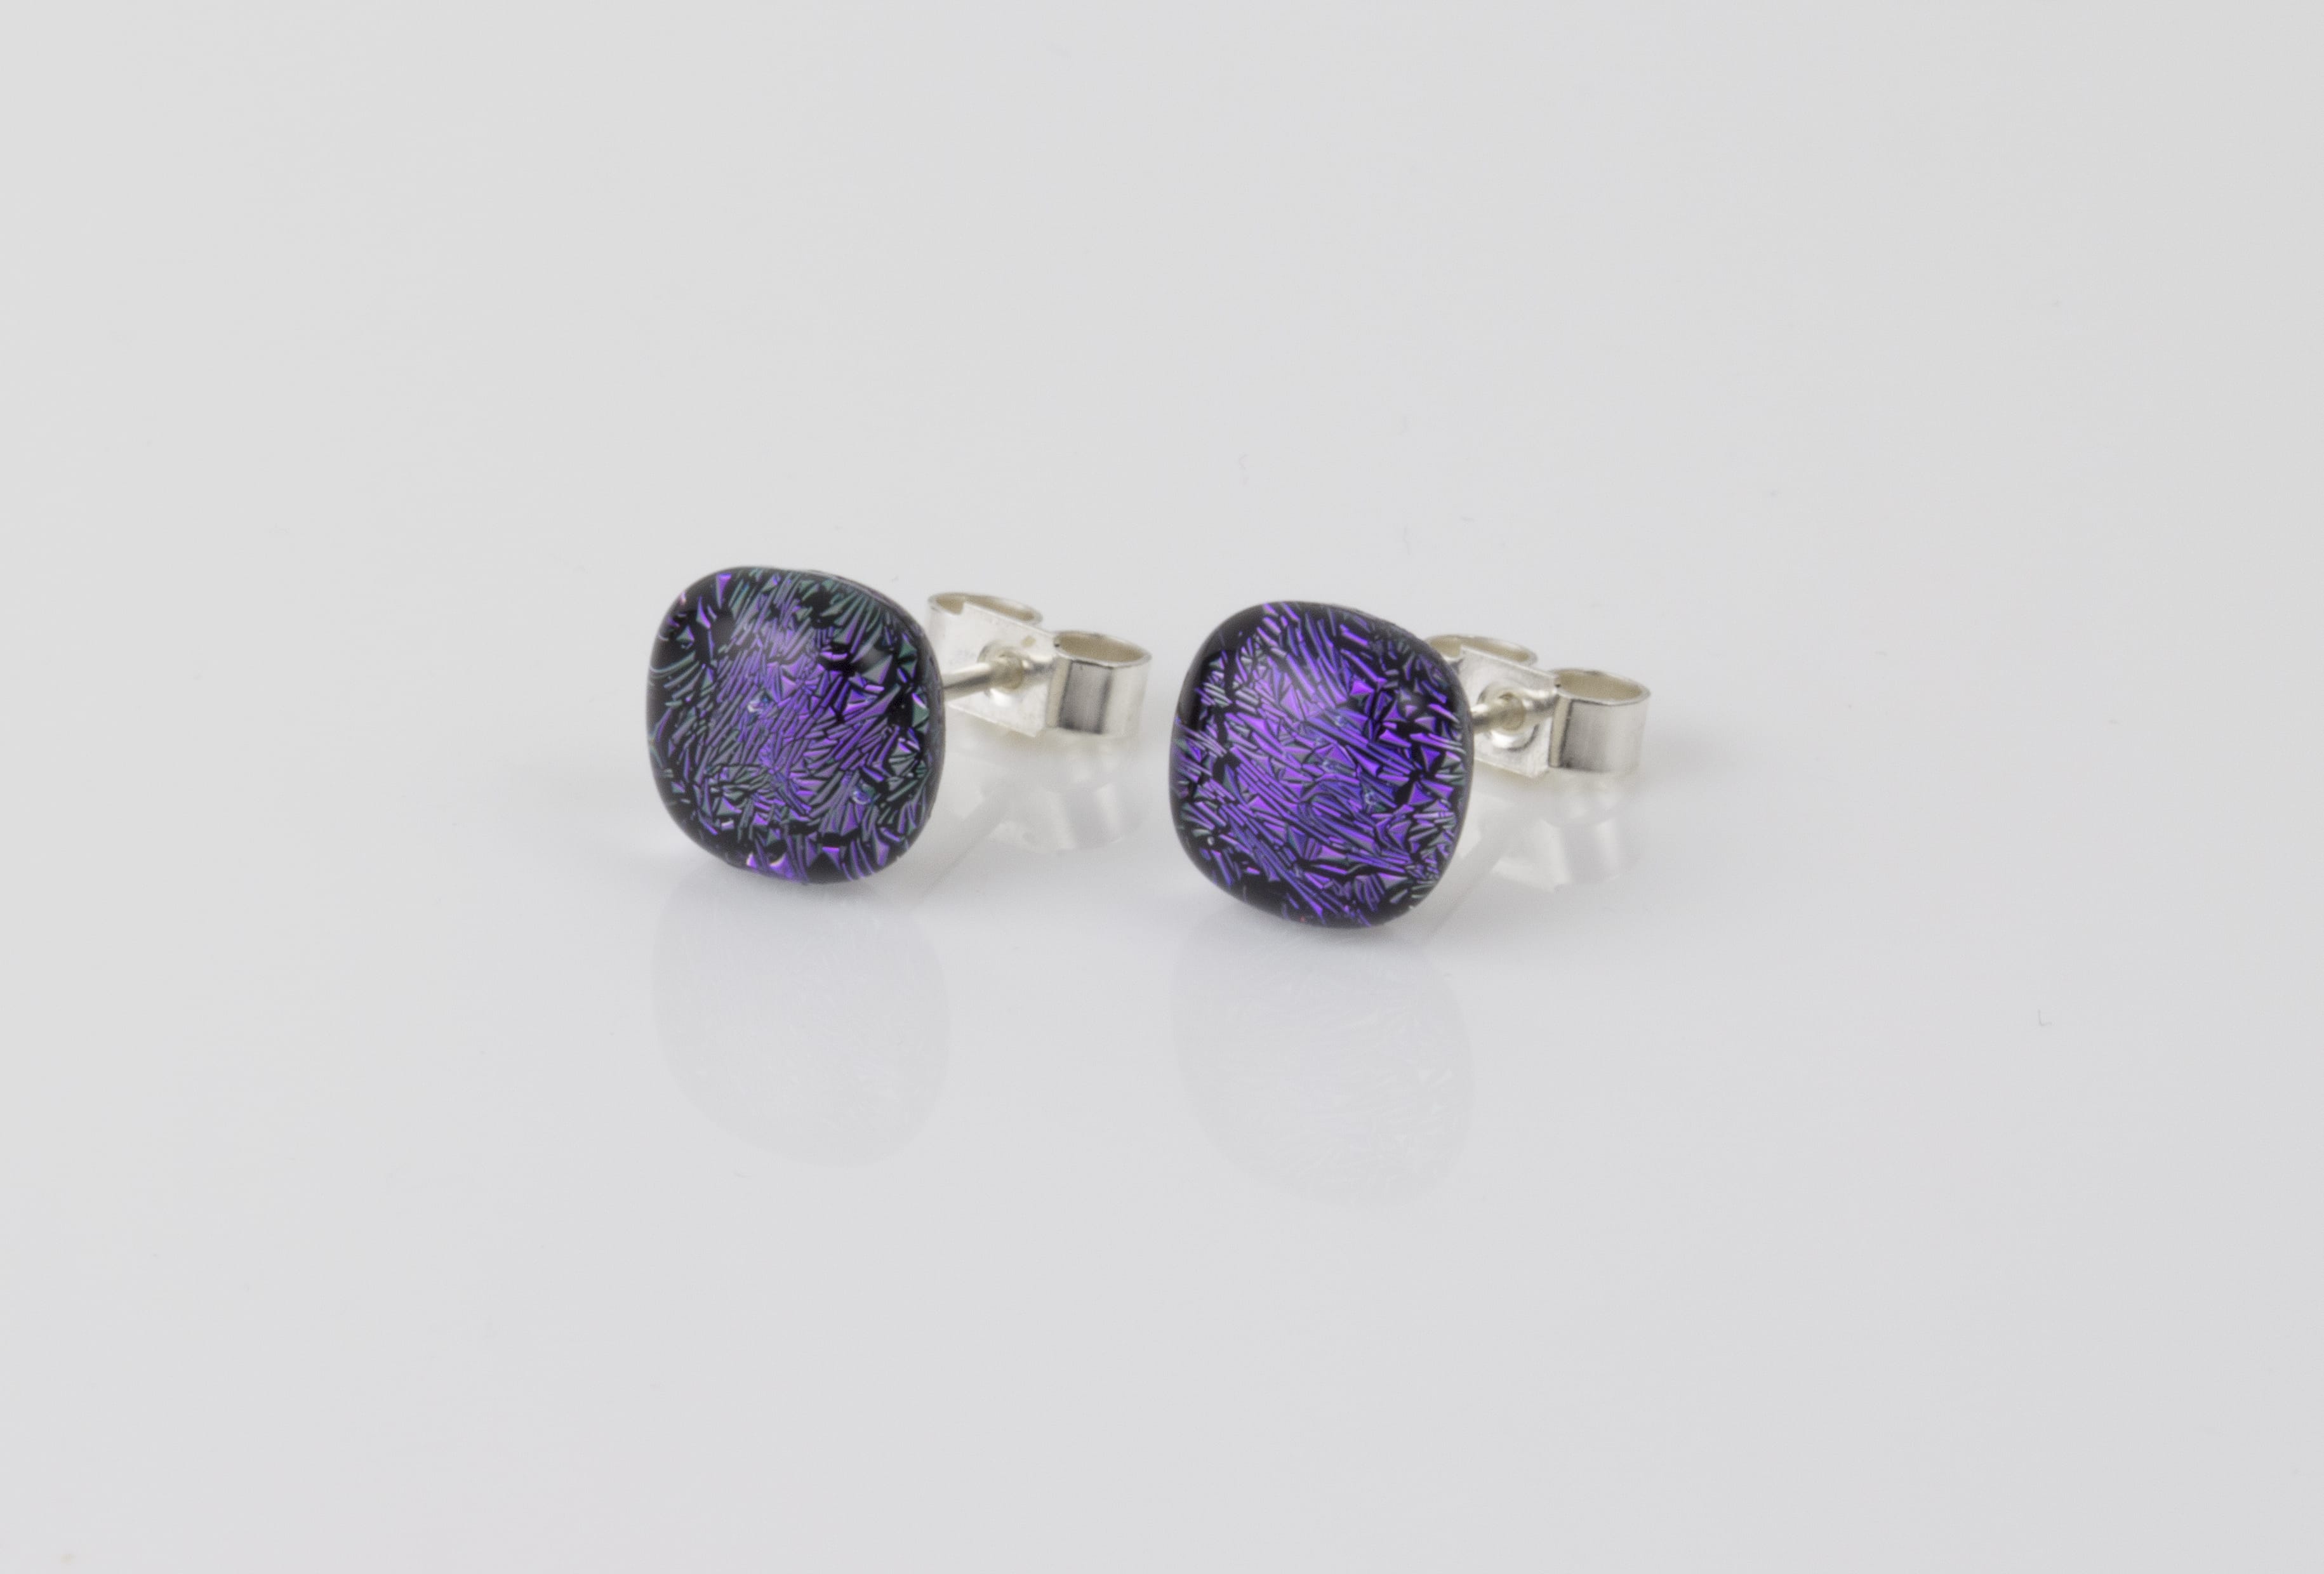 Dichroic glass jewellery uk, handmade stud earrings with purple dichroic glass, round, sterling glass 7-9mm, silver posts.